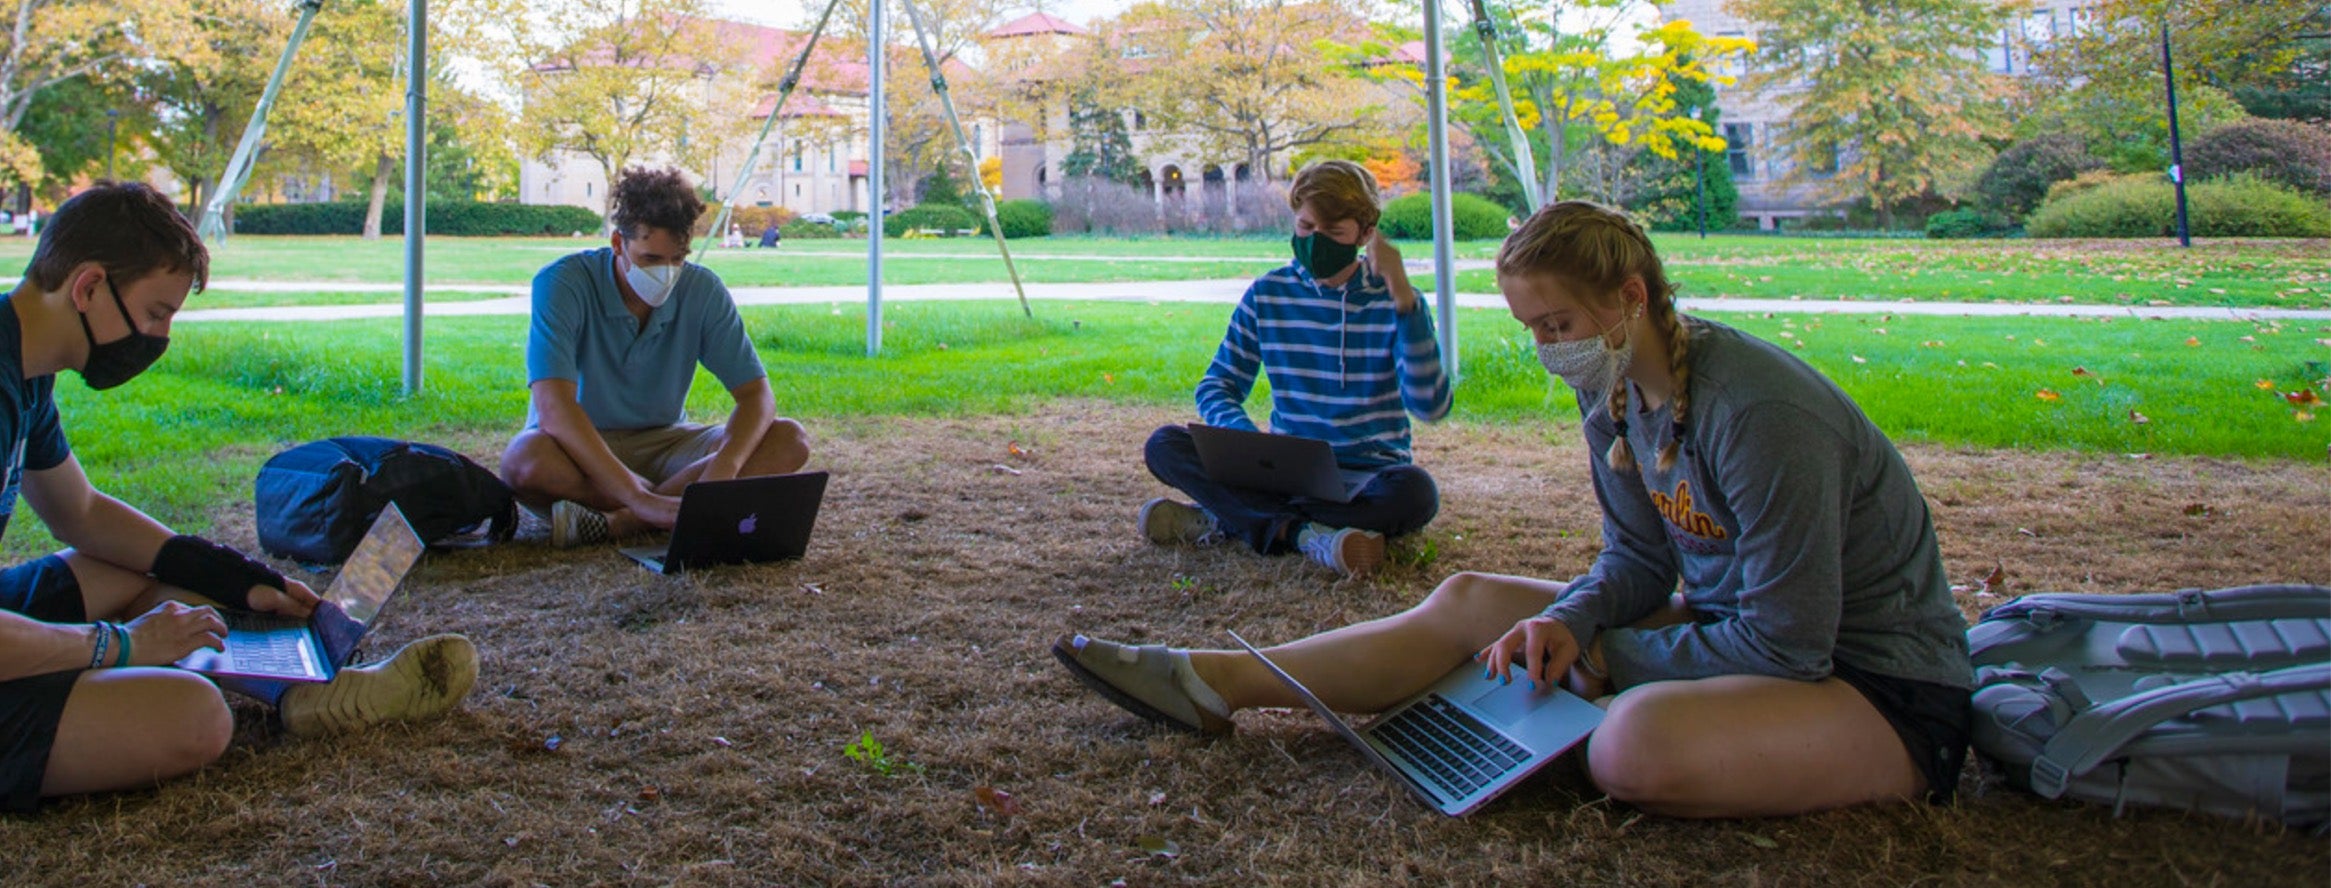 Seated in a circle in the grass, several students work on laptop computers. All are masked.